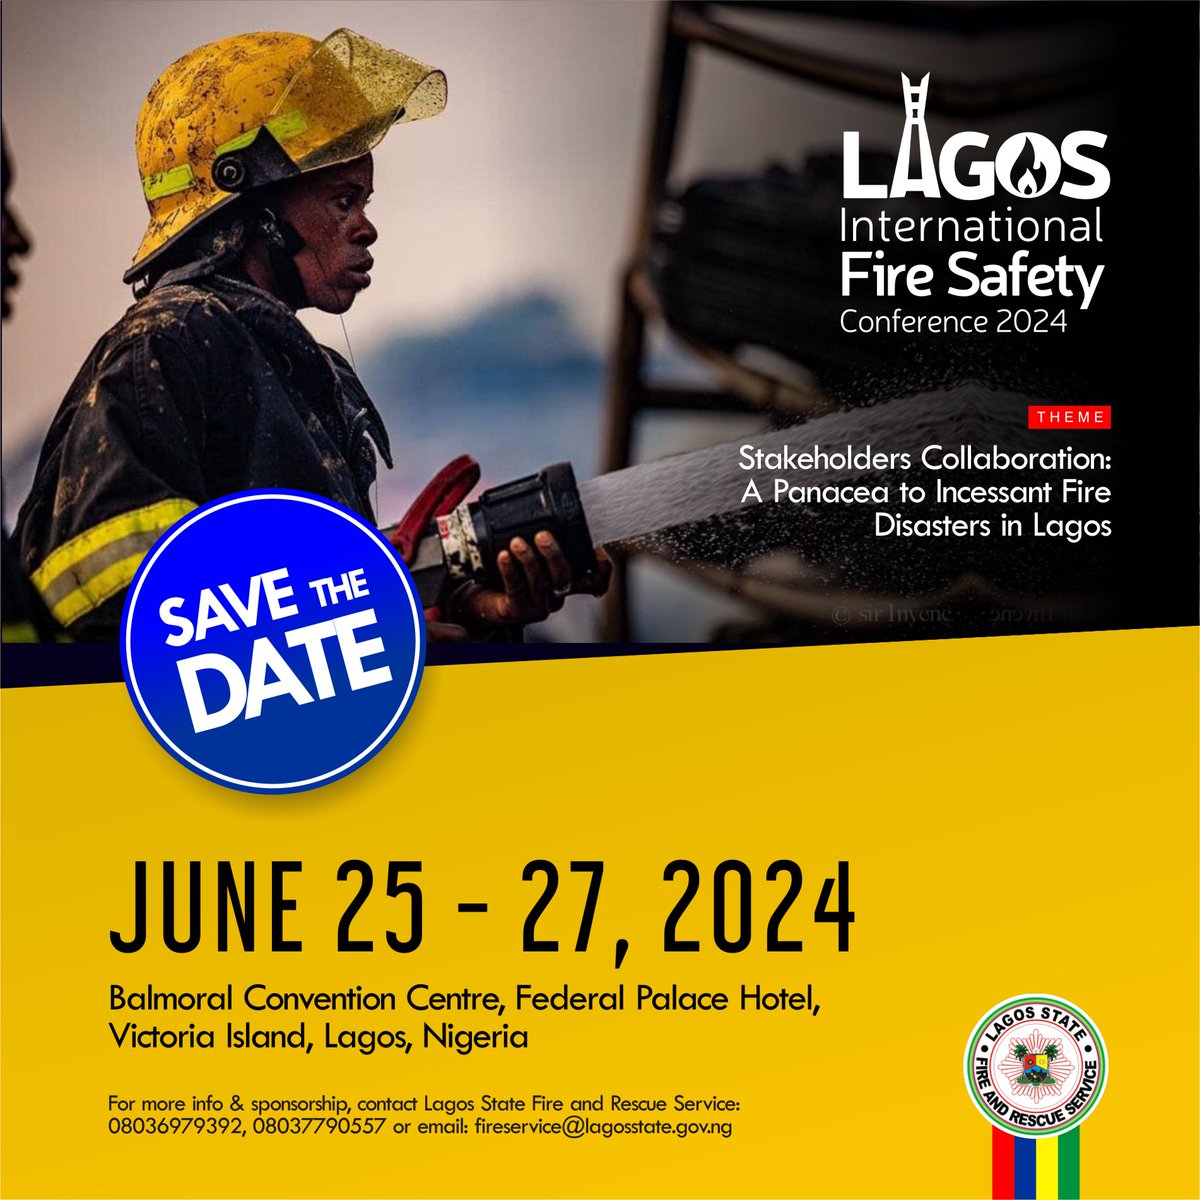 🔥Here’s the perfect opportunity for your professional growth!
Join us at the LAGOS INTERNATIONAL FIRE SAFETY CONFERENCE.

Register now at shorturl.at/evw08
For sponsorship, exhibition & more contact +2348036979392 or fireservice@lagosstate.gov.ng

#LIFSC2024 #FireFreeLagos